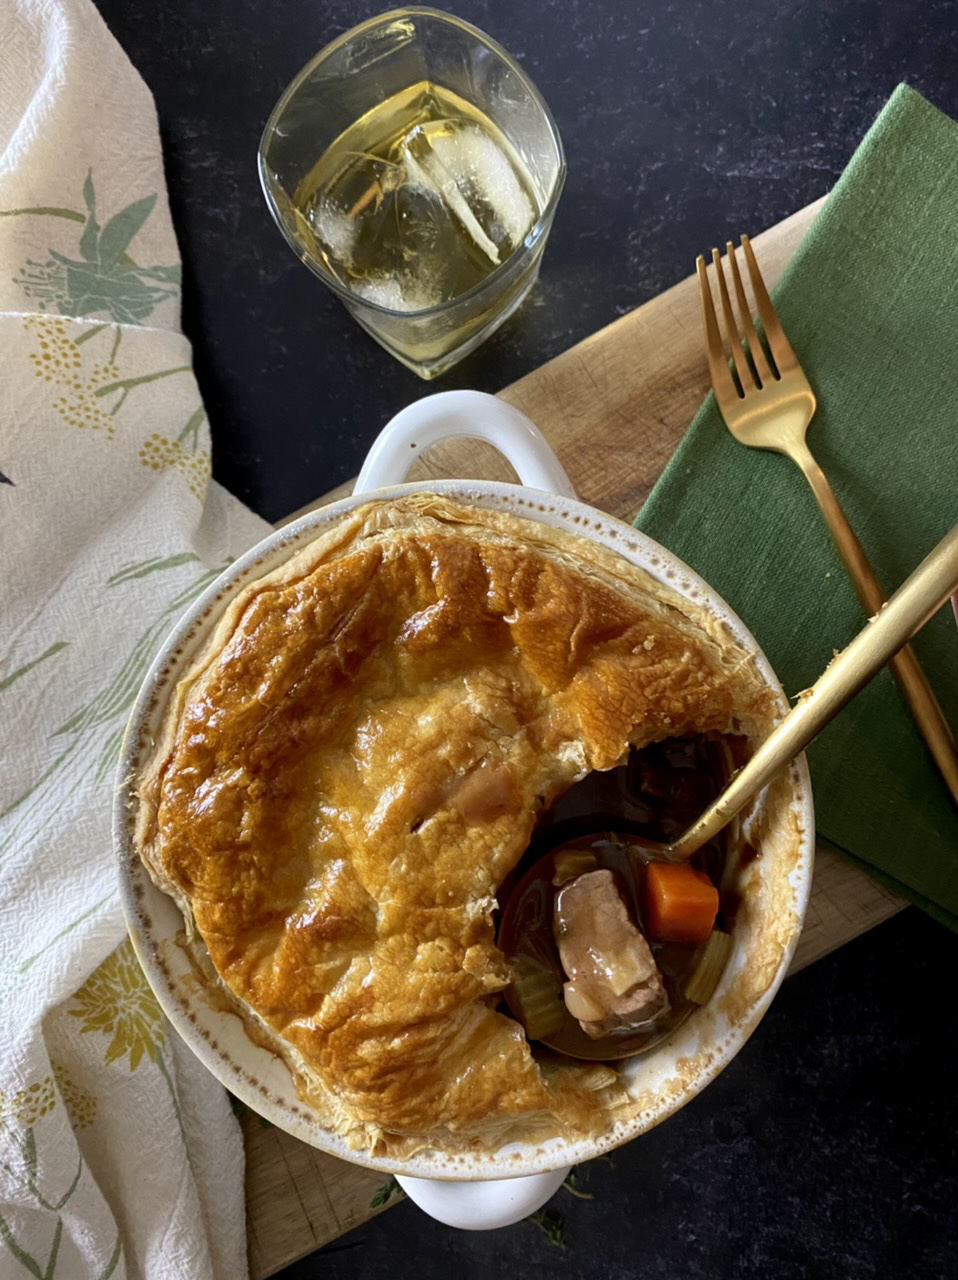 F662255A 1618 4F93 BB9C C82034636C87 - The Best Pub-Style Beef & Guinness Pie